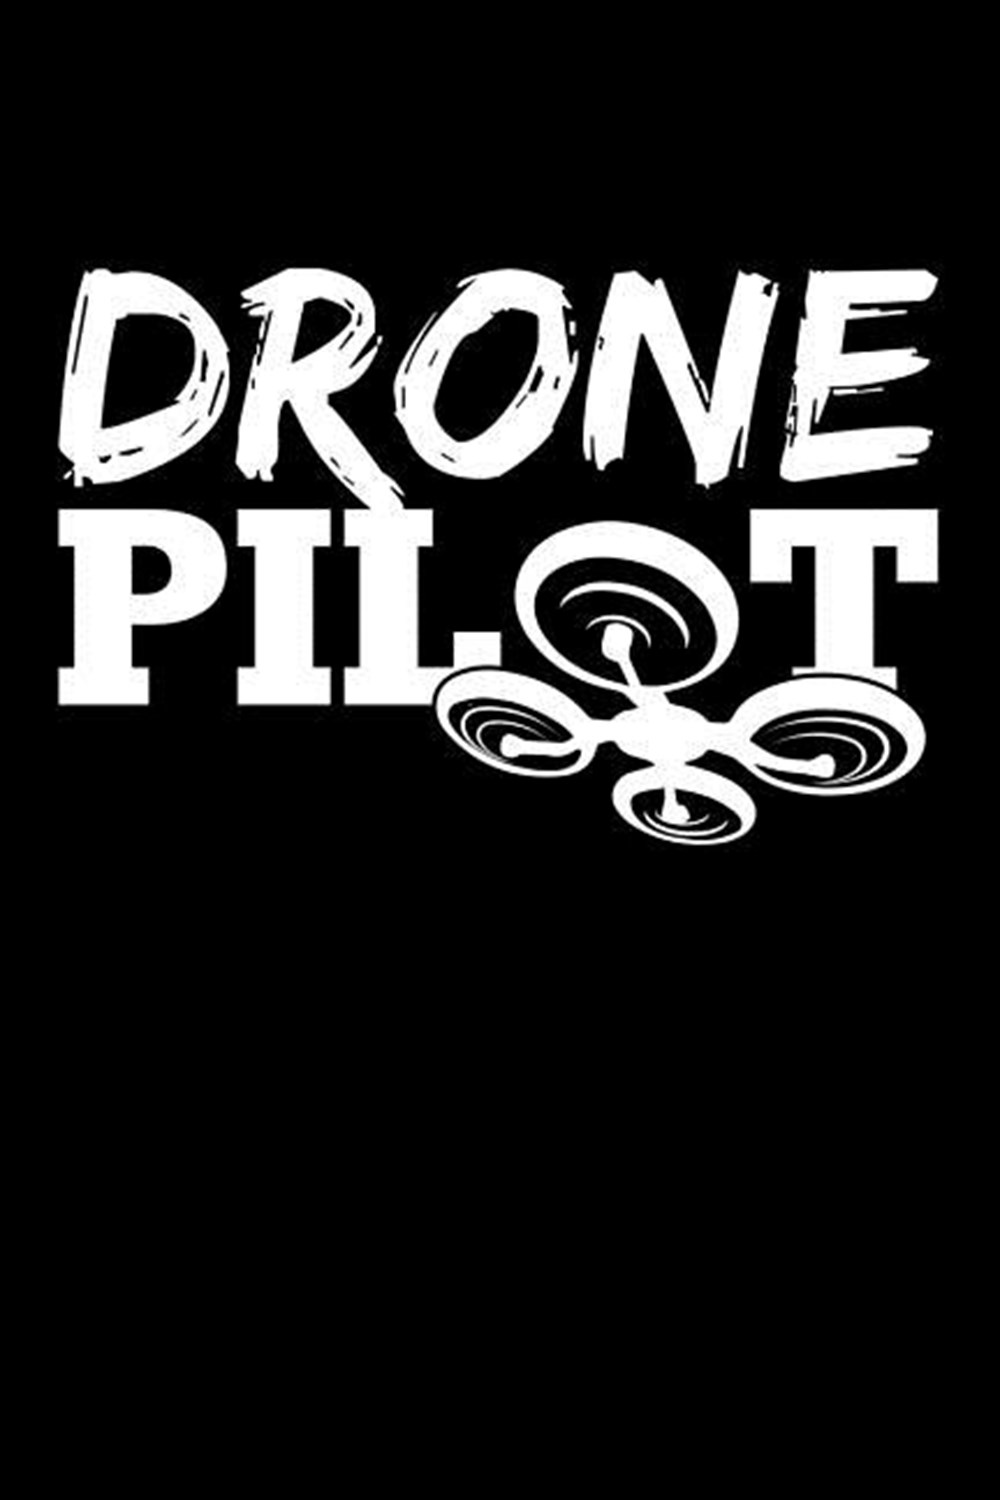 Drone Pilot Blank Paper Sketch Book - Artist Sketch Pad Journal for Sketching, Doodling, Drawing, Pa